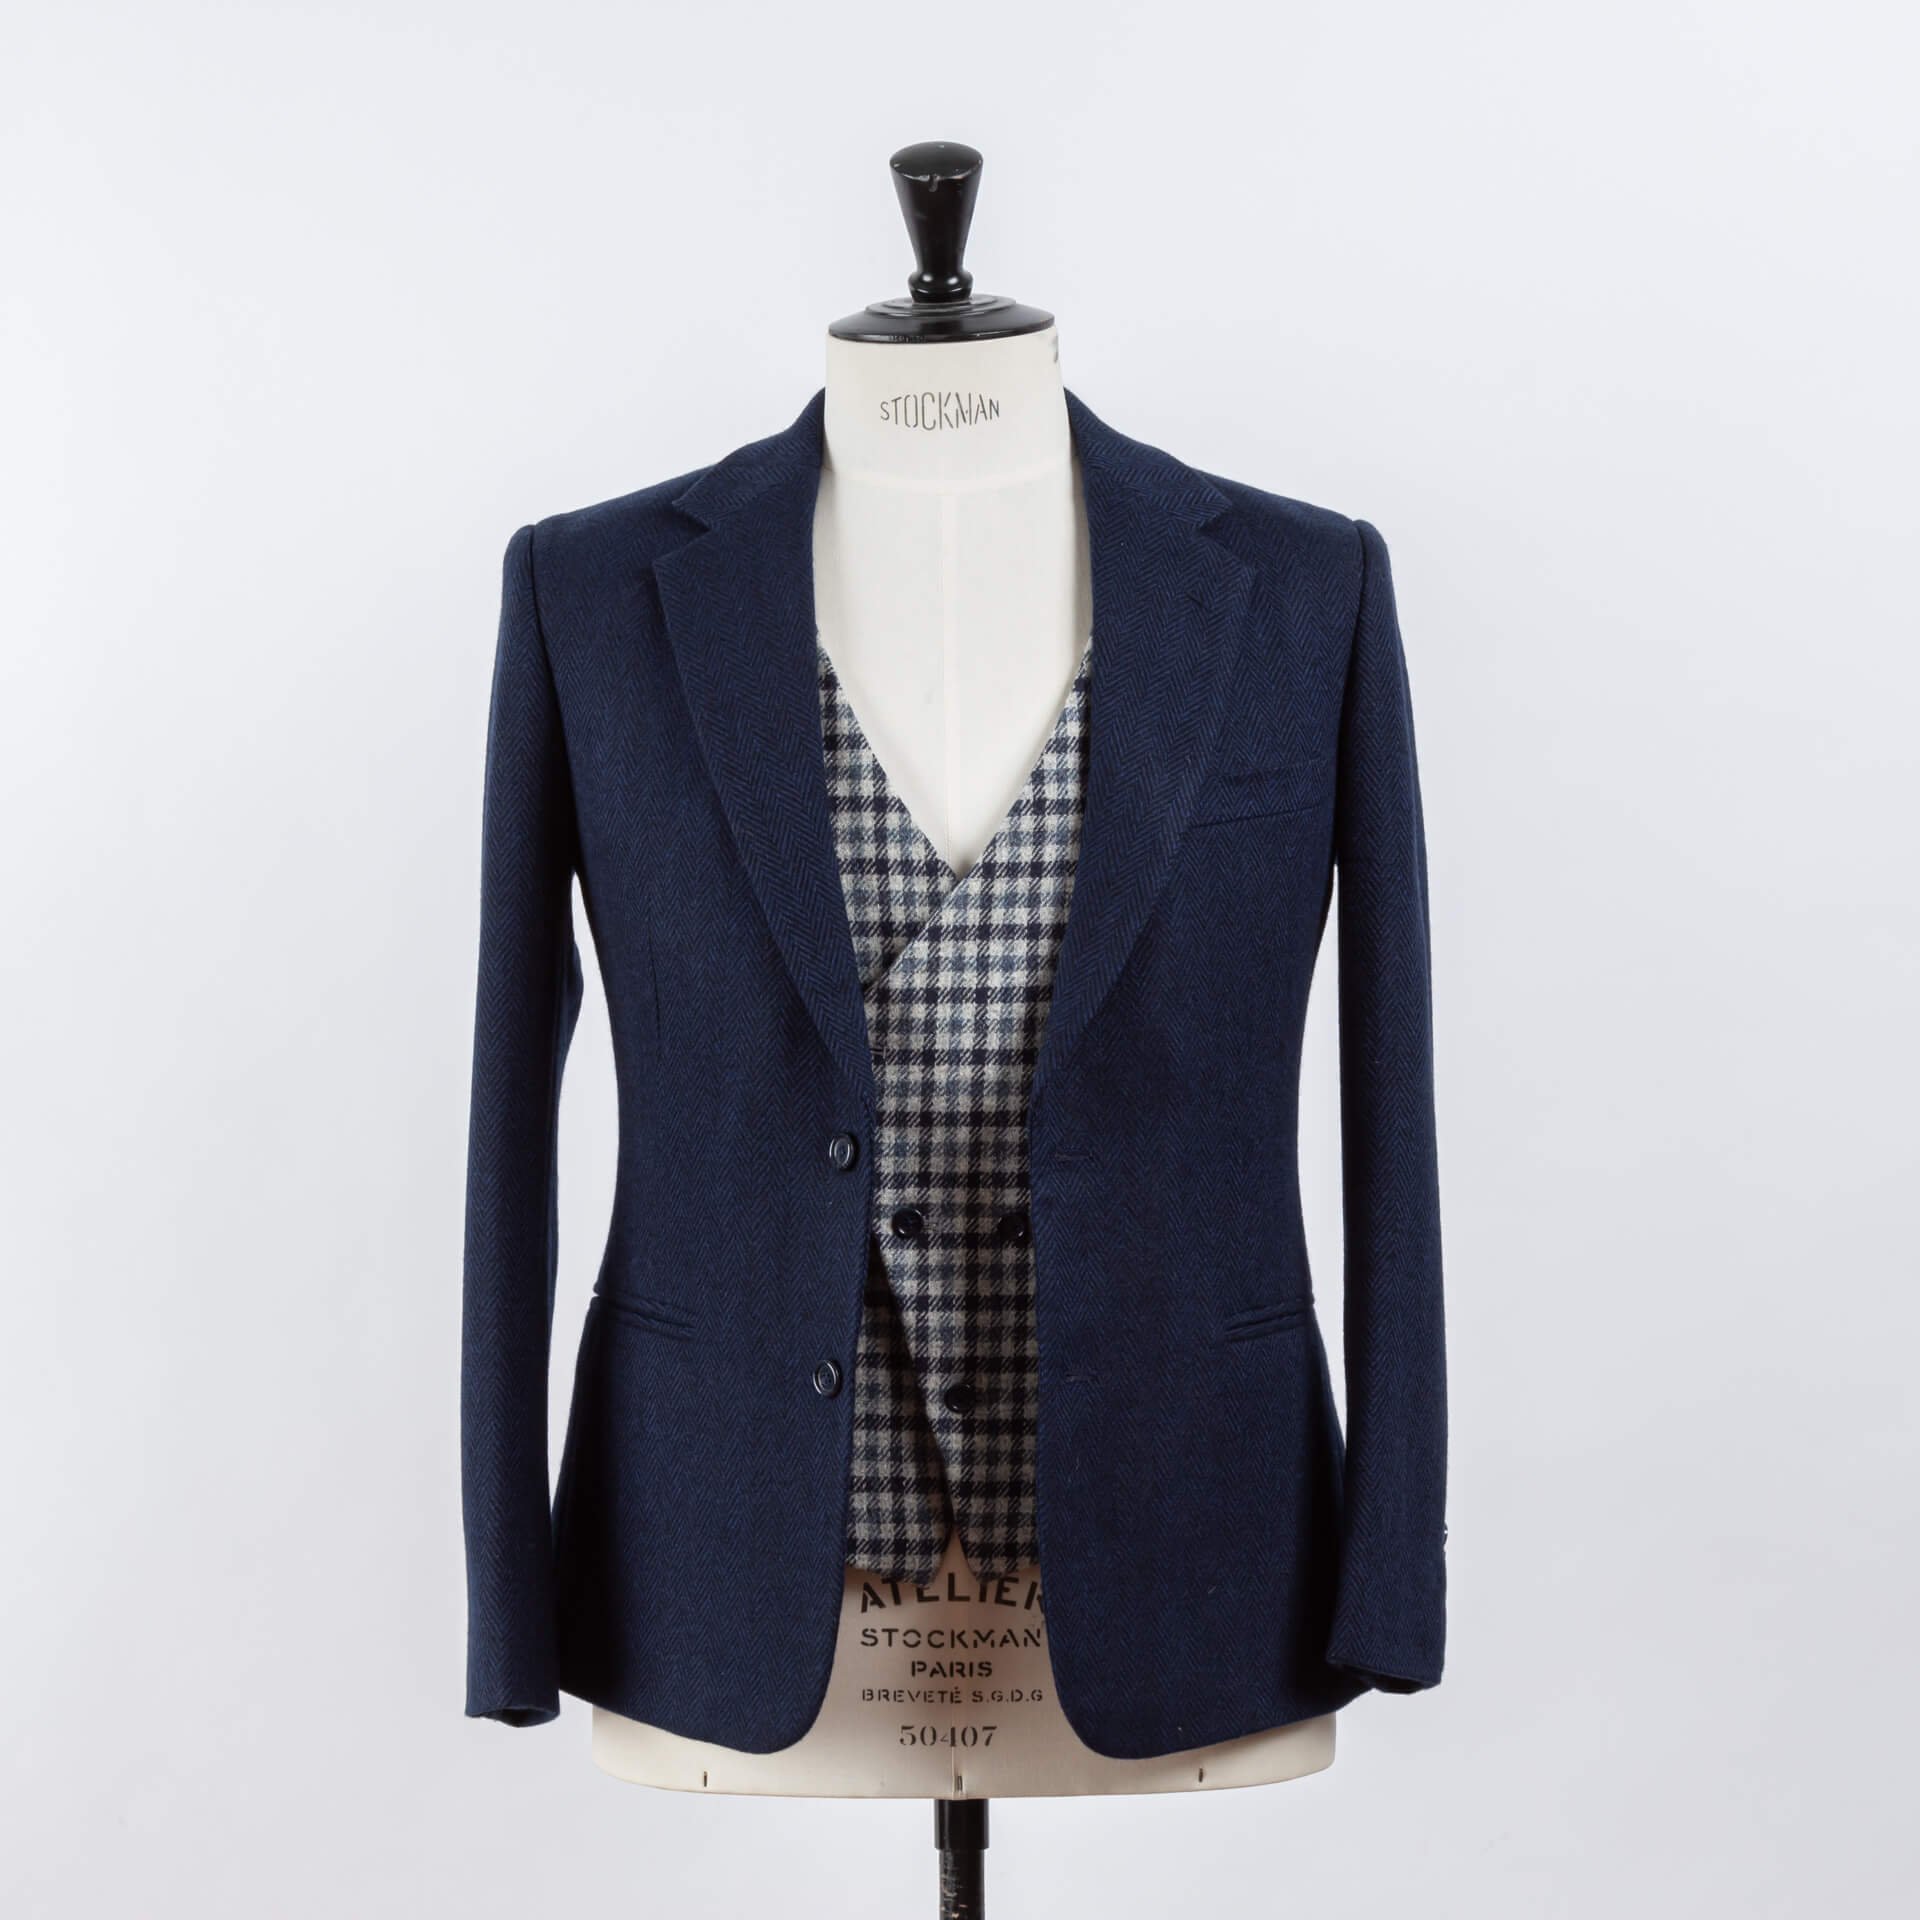 Business Casual Outfit Flannel Tweed